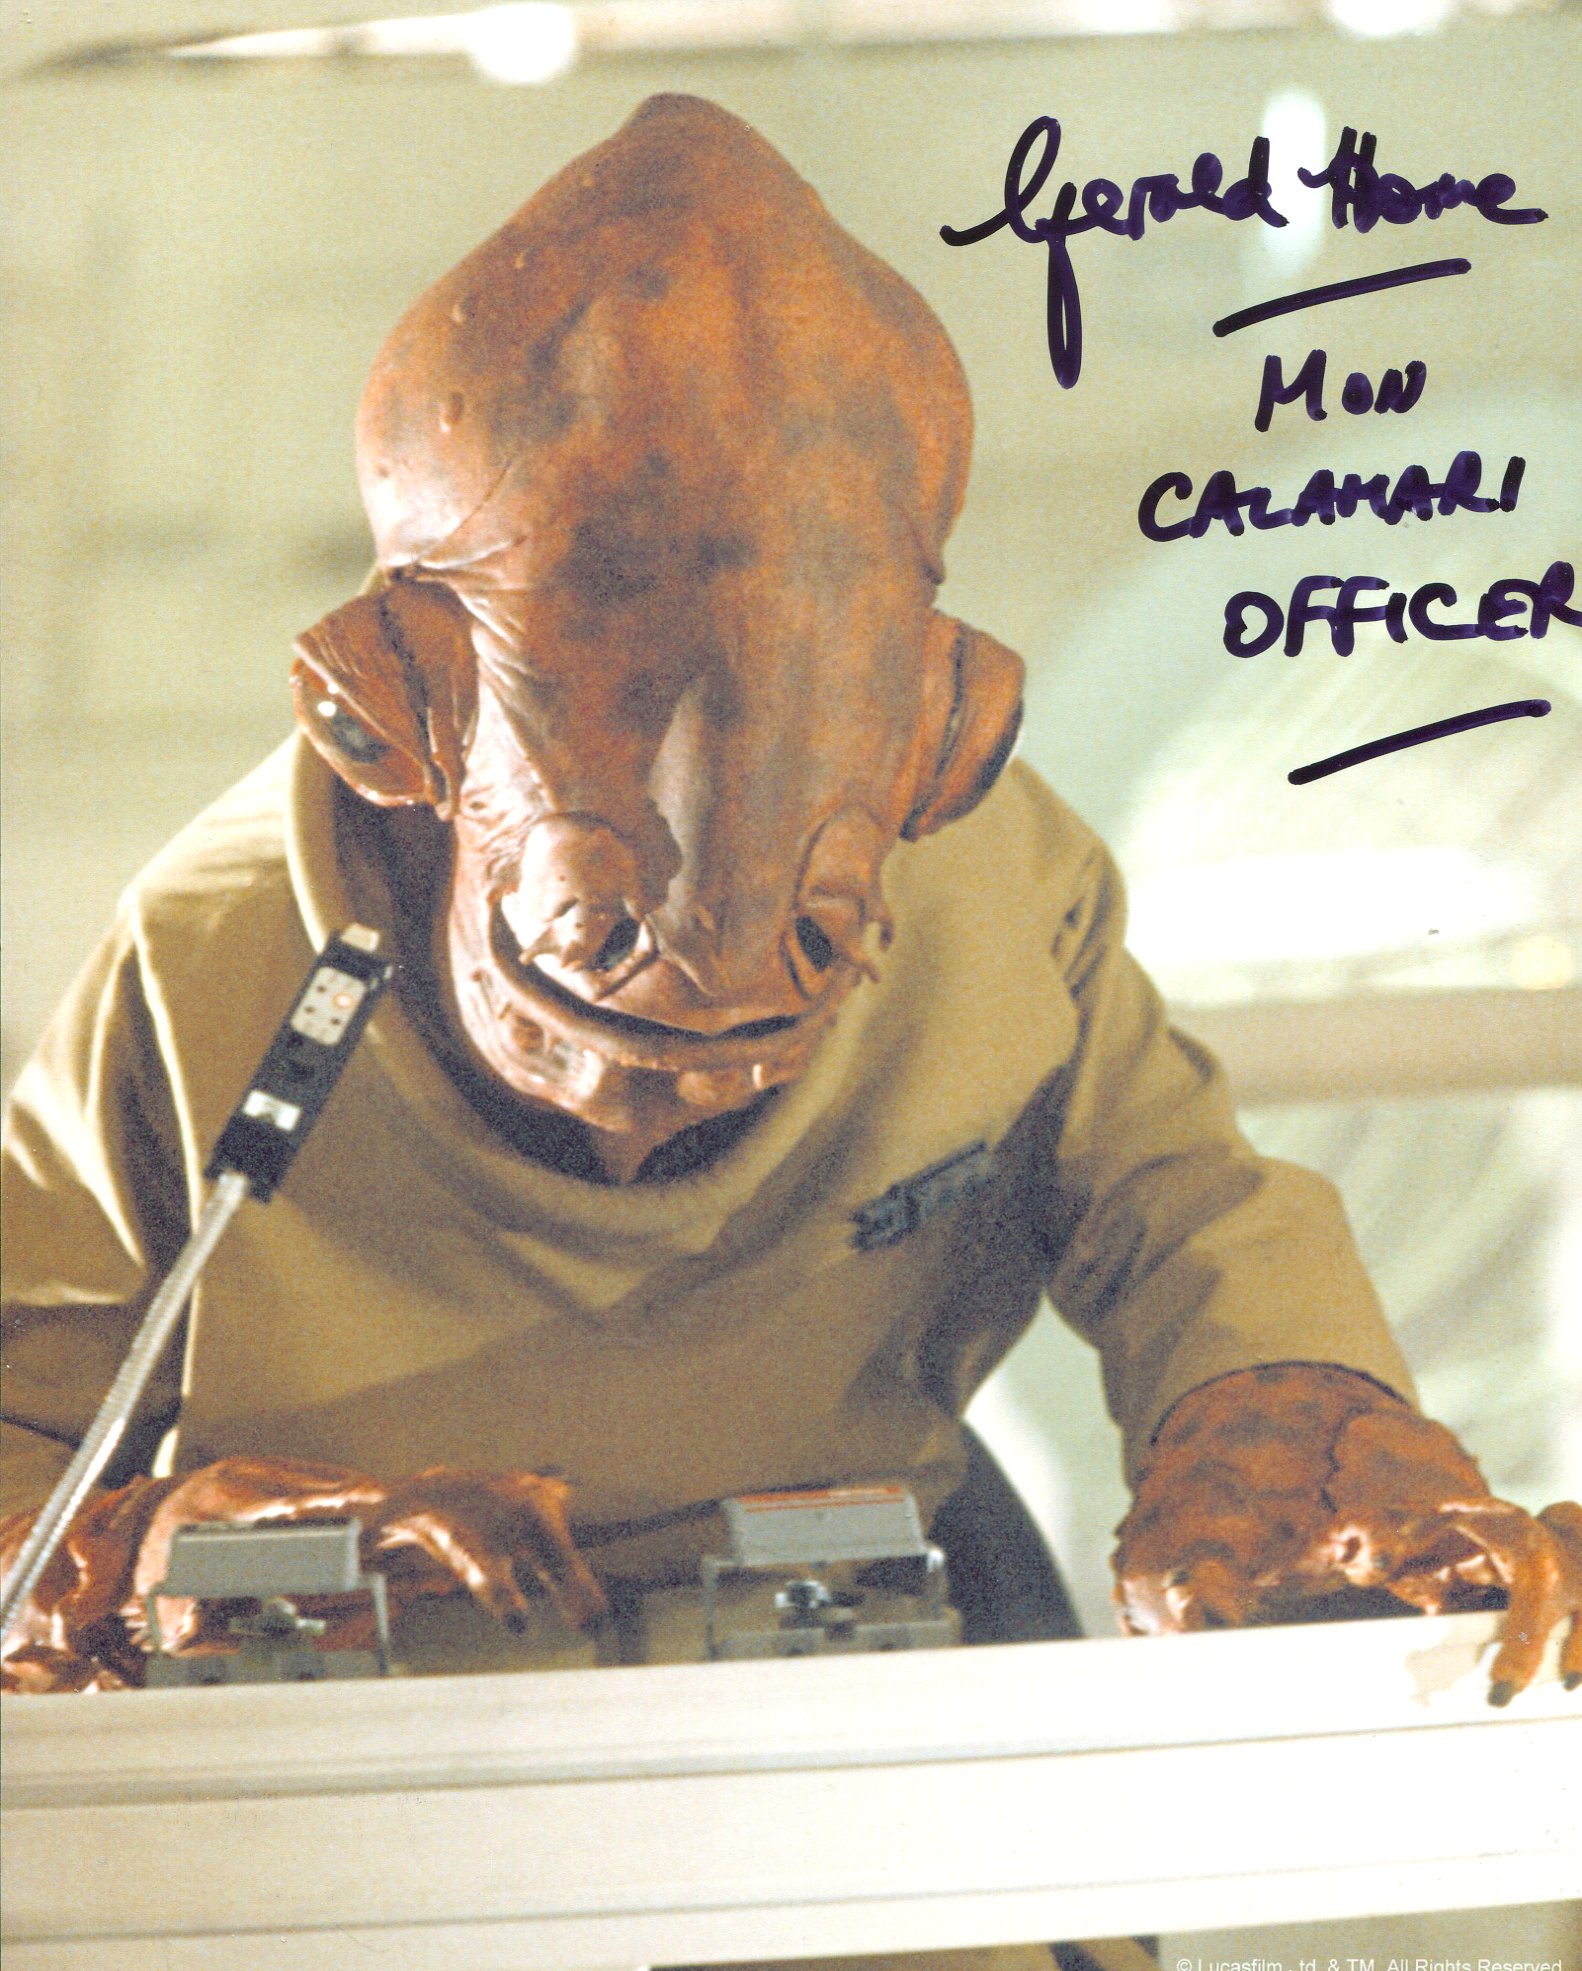 Star Wars 8x10 photo from Return of the Jedi, signed by actor Gerald Home as a Mon Calamari officer.